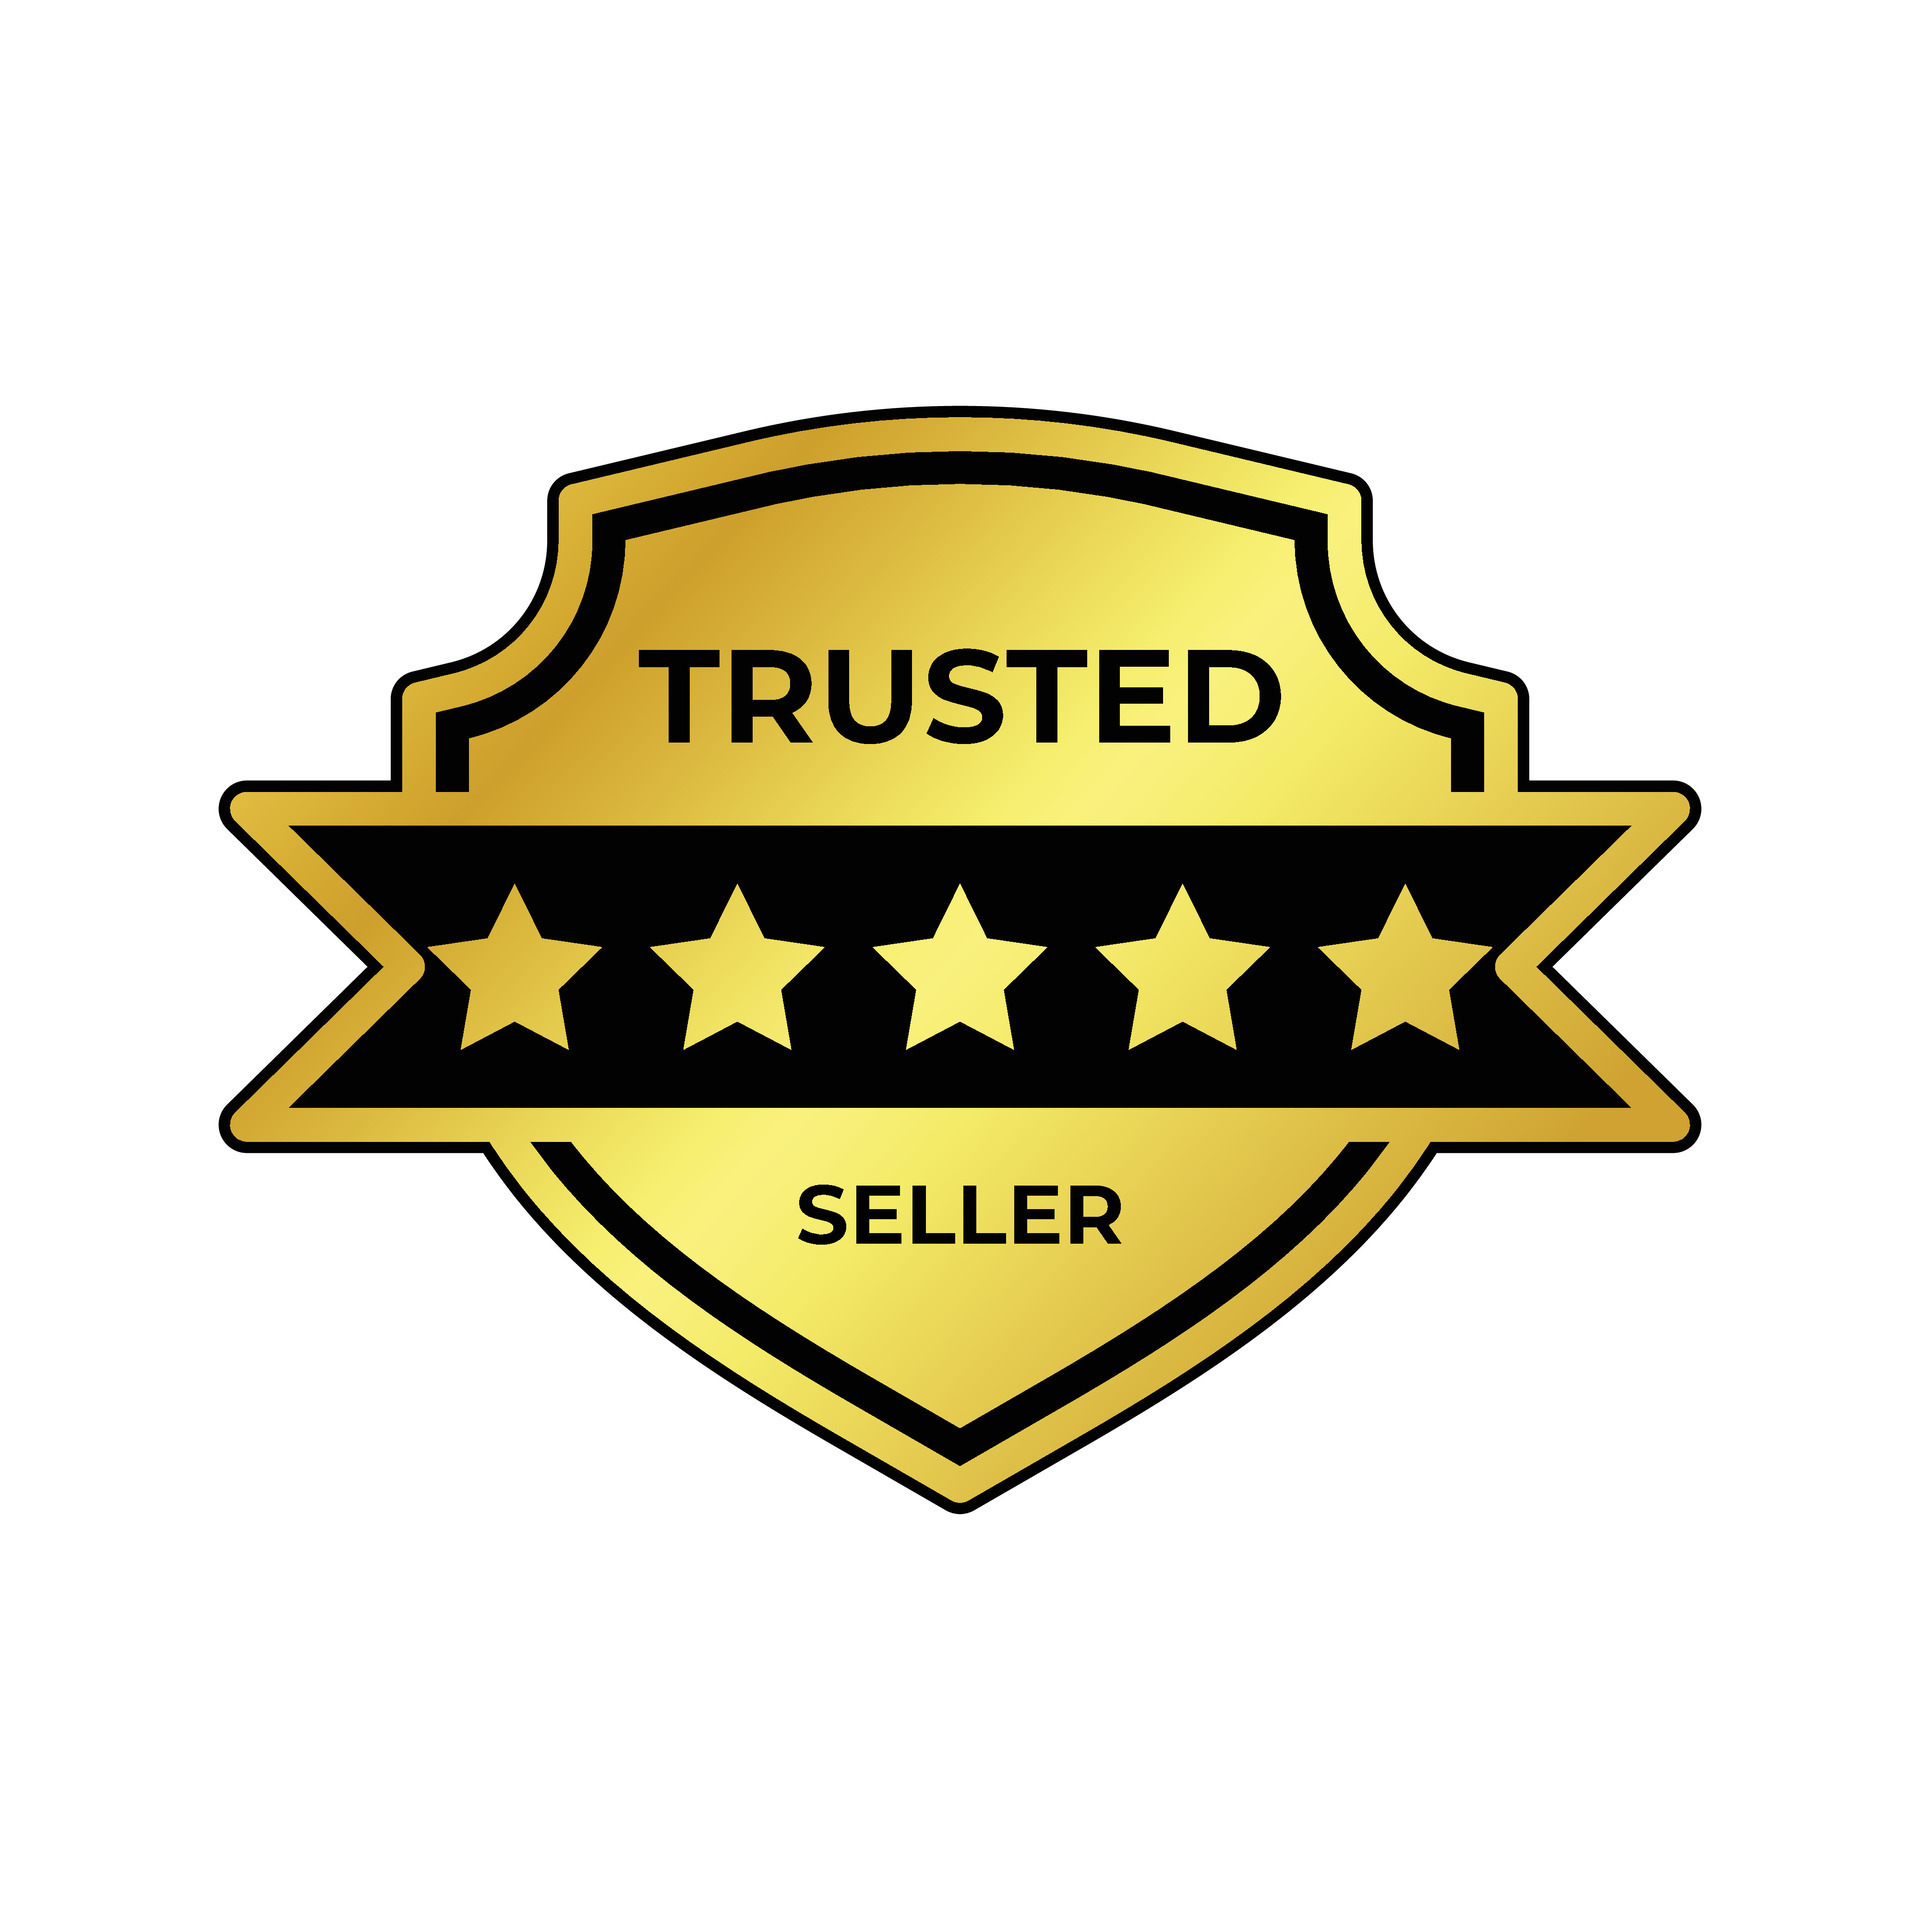 https://static.vecteezy.com/system/resources/previews/026/711/265/original/trusted-seller-label-best-seller-premium-member-badge-verified-seller-rubber-stamp-shield-illustration-3d-realistic-glossy-and-shiny-badge-vector.jpg